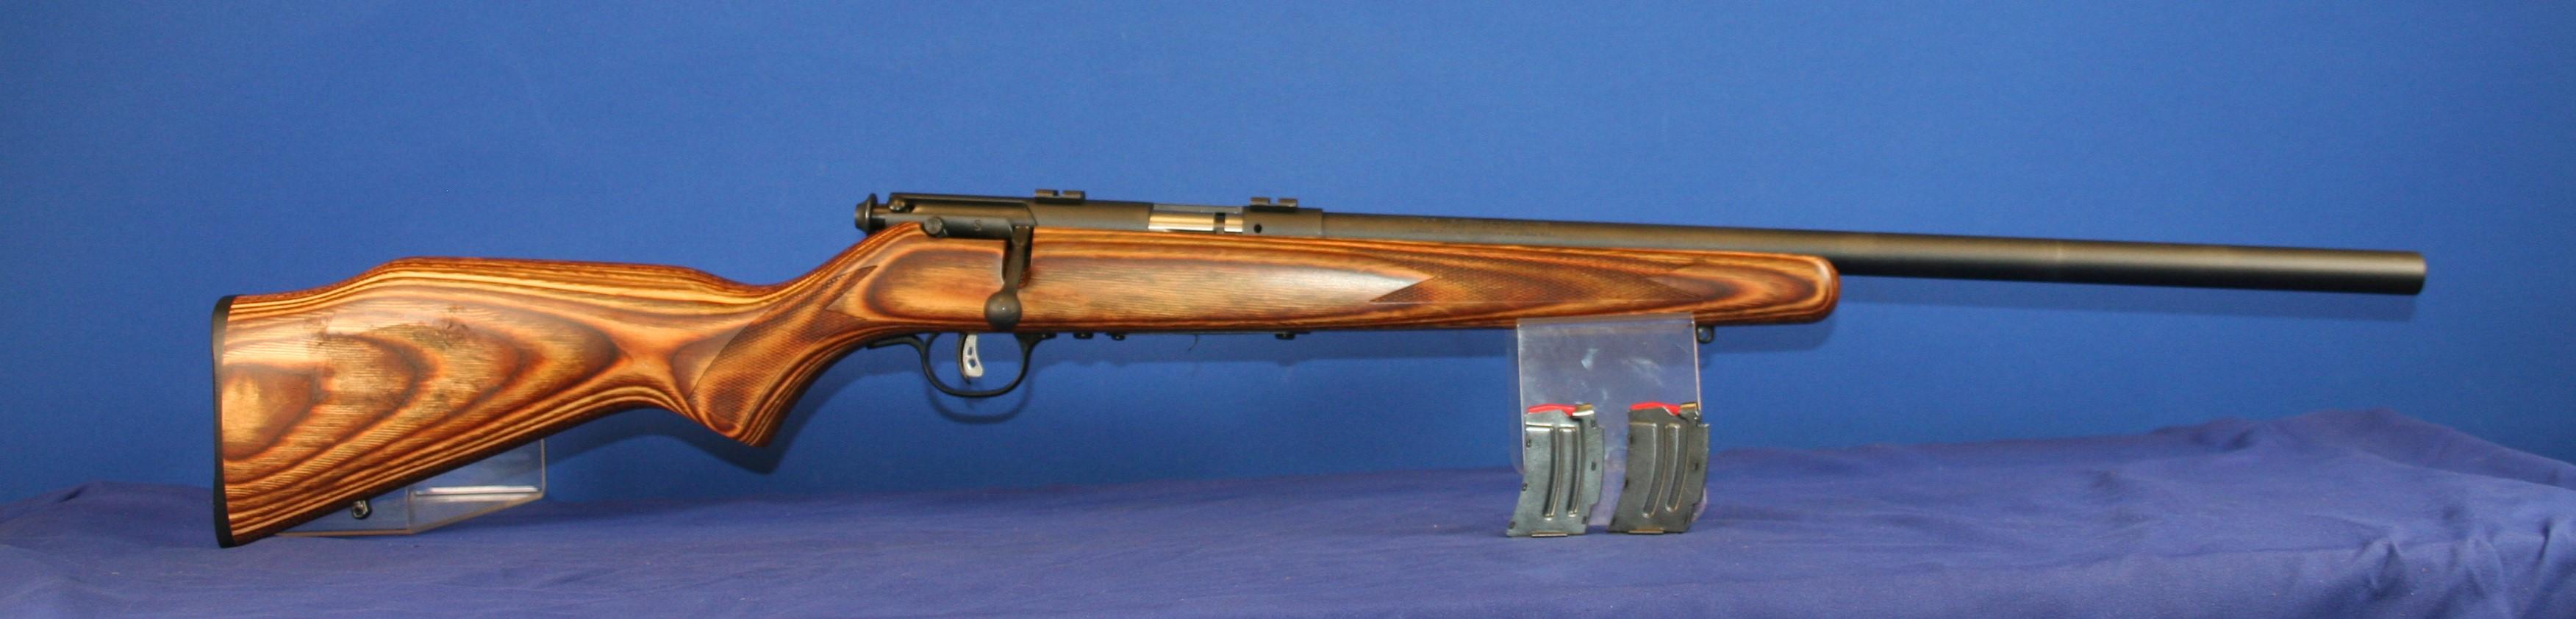 Savage Mark II Rifle 22lr. 21" Barrel, Two 10-Round Magazines. SN# 2908951.  In Excellent Condition.